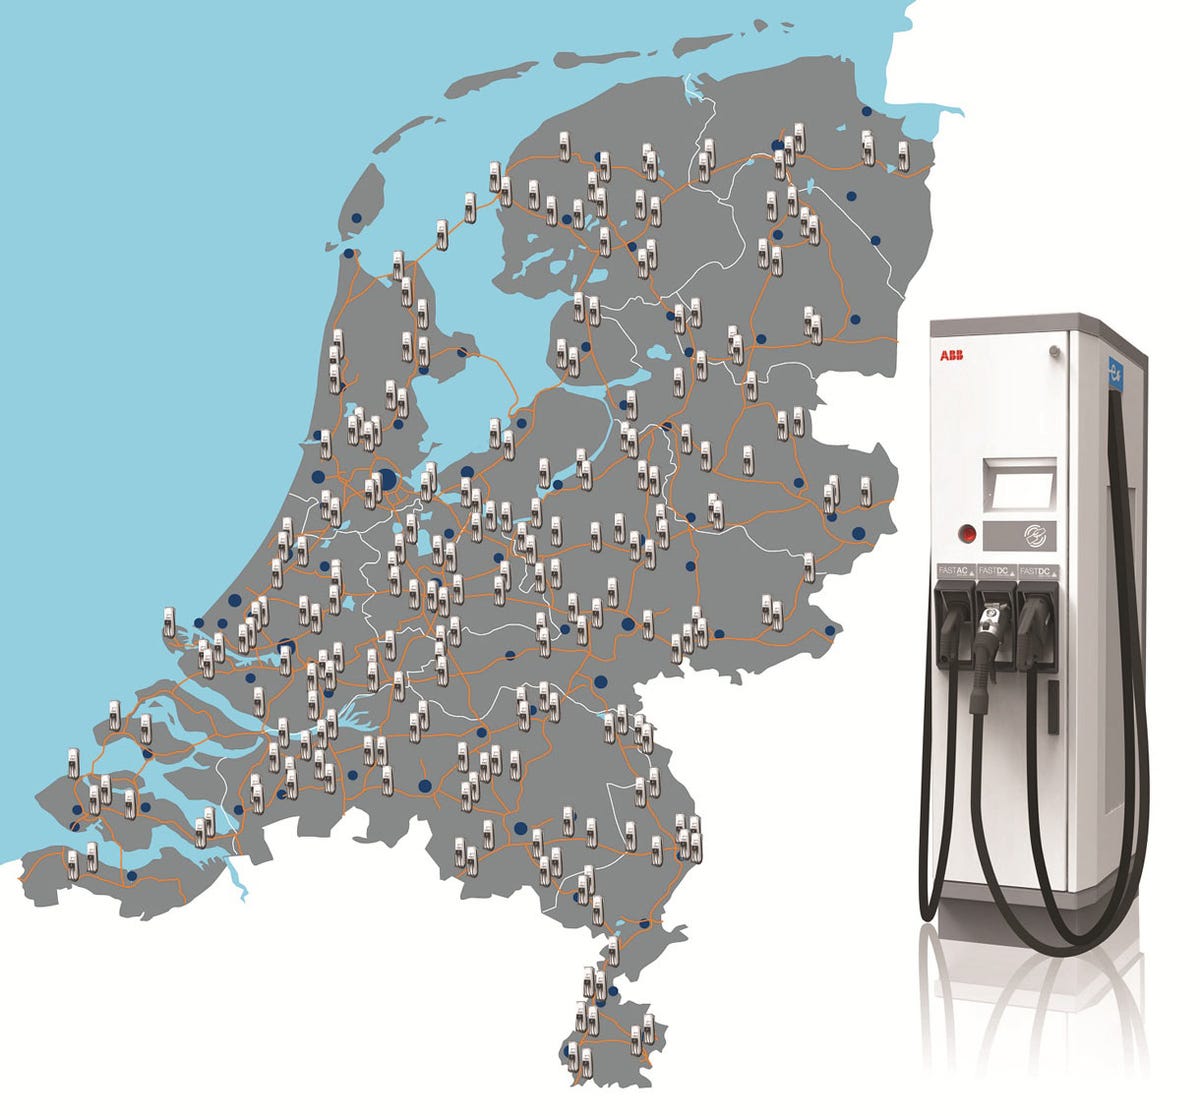 The planned Fastned electric-vehicle charging station network in the Netherlands.